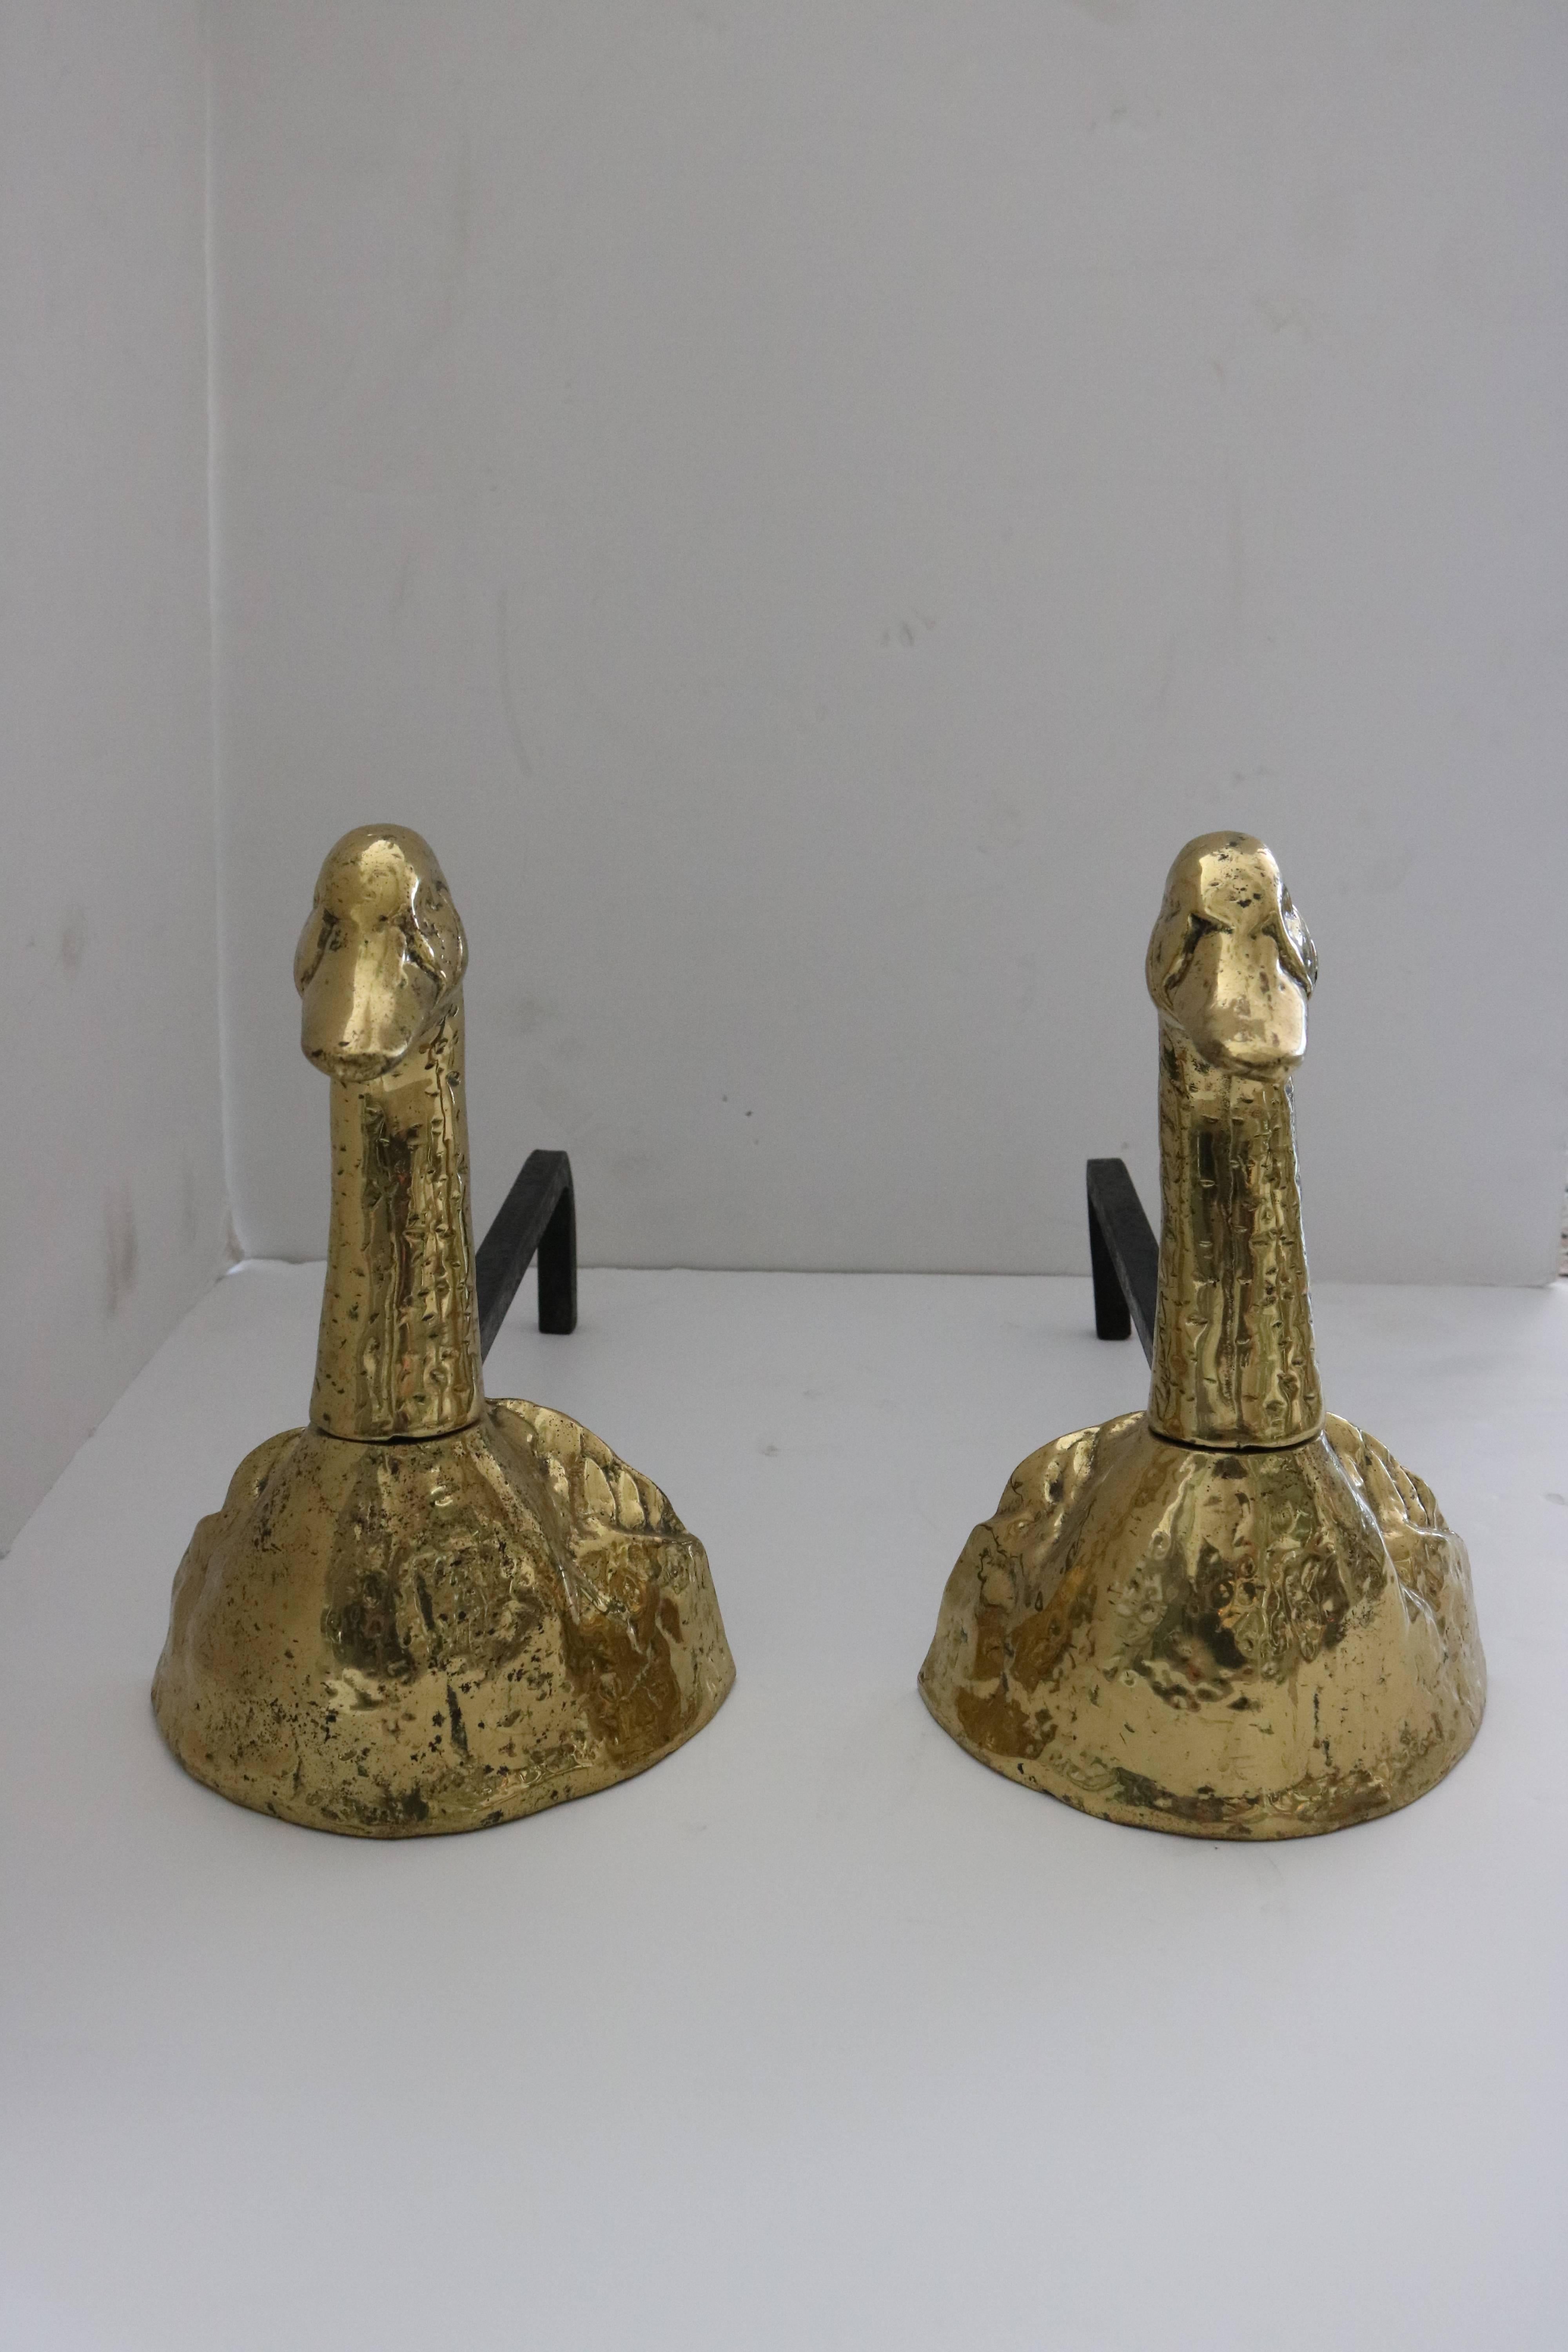 This handsome set of andirons date from the 1940s and are cast brass with Mallard duck forms. The pieces are highly detailed with a naturalistic chasing details.

Note: The heads can turn 360 degrees.

Please feel free to contact us directly for